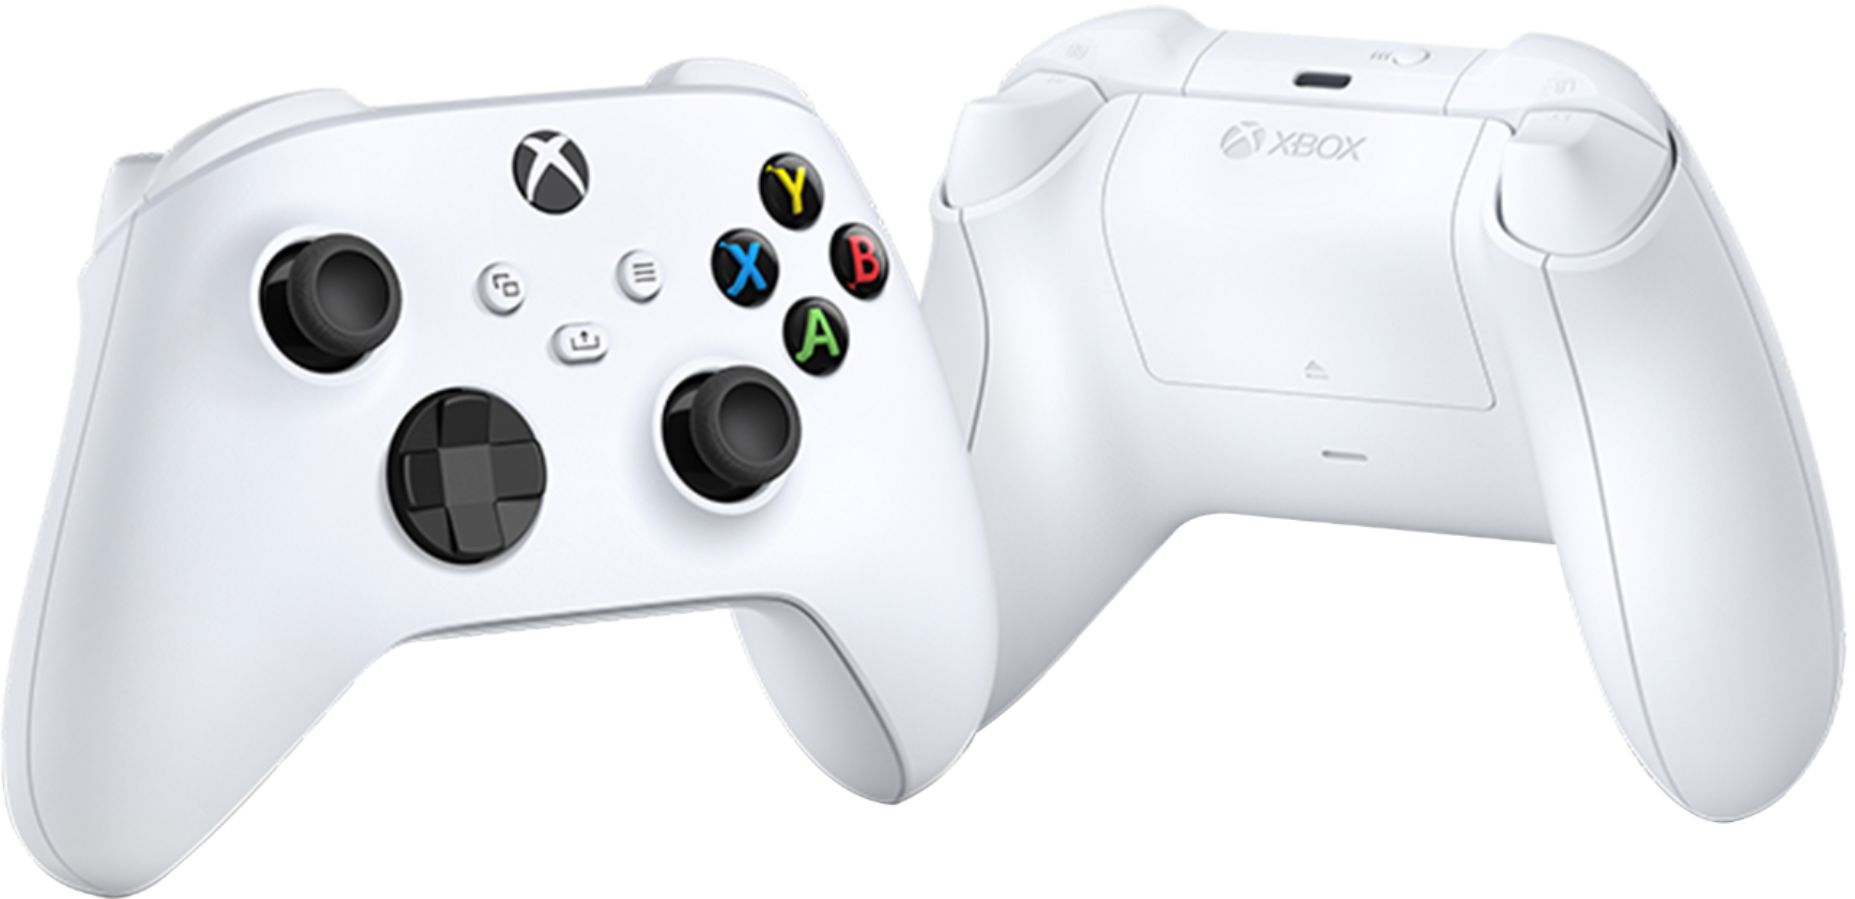 xbox one s controller cheapest price